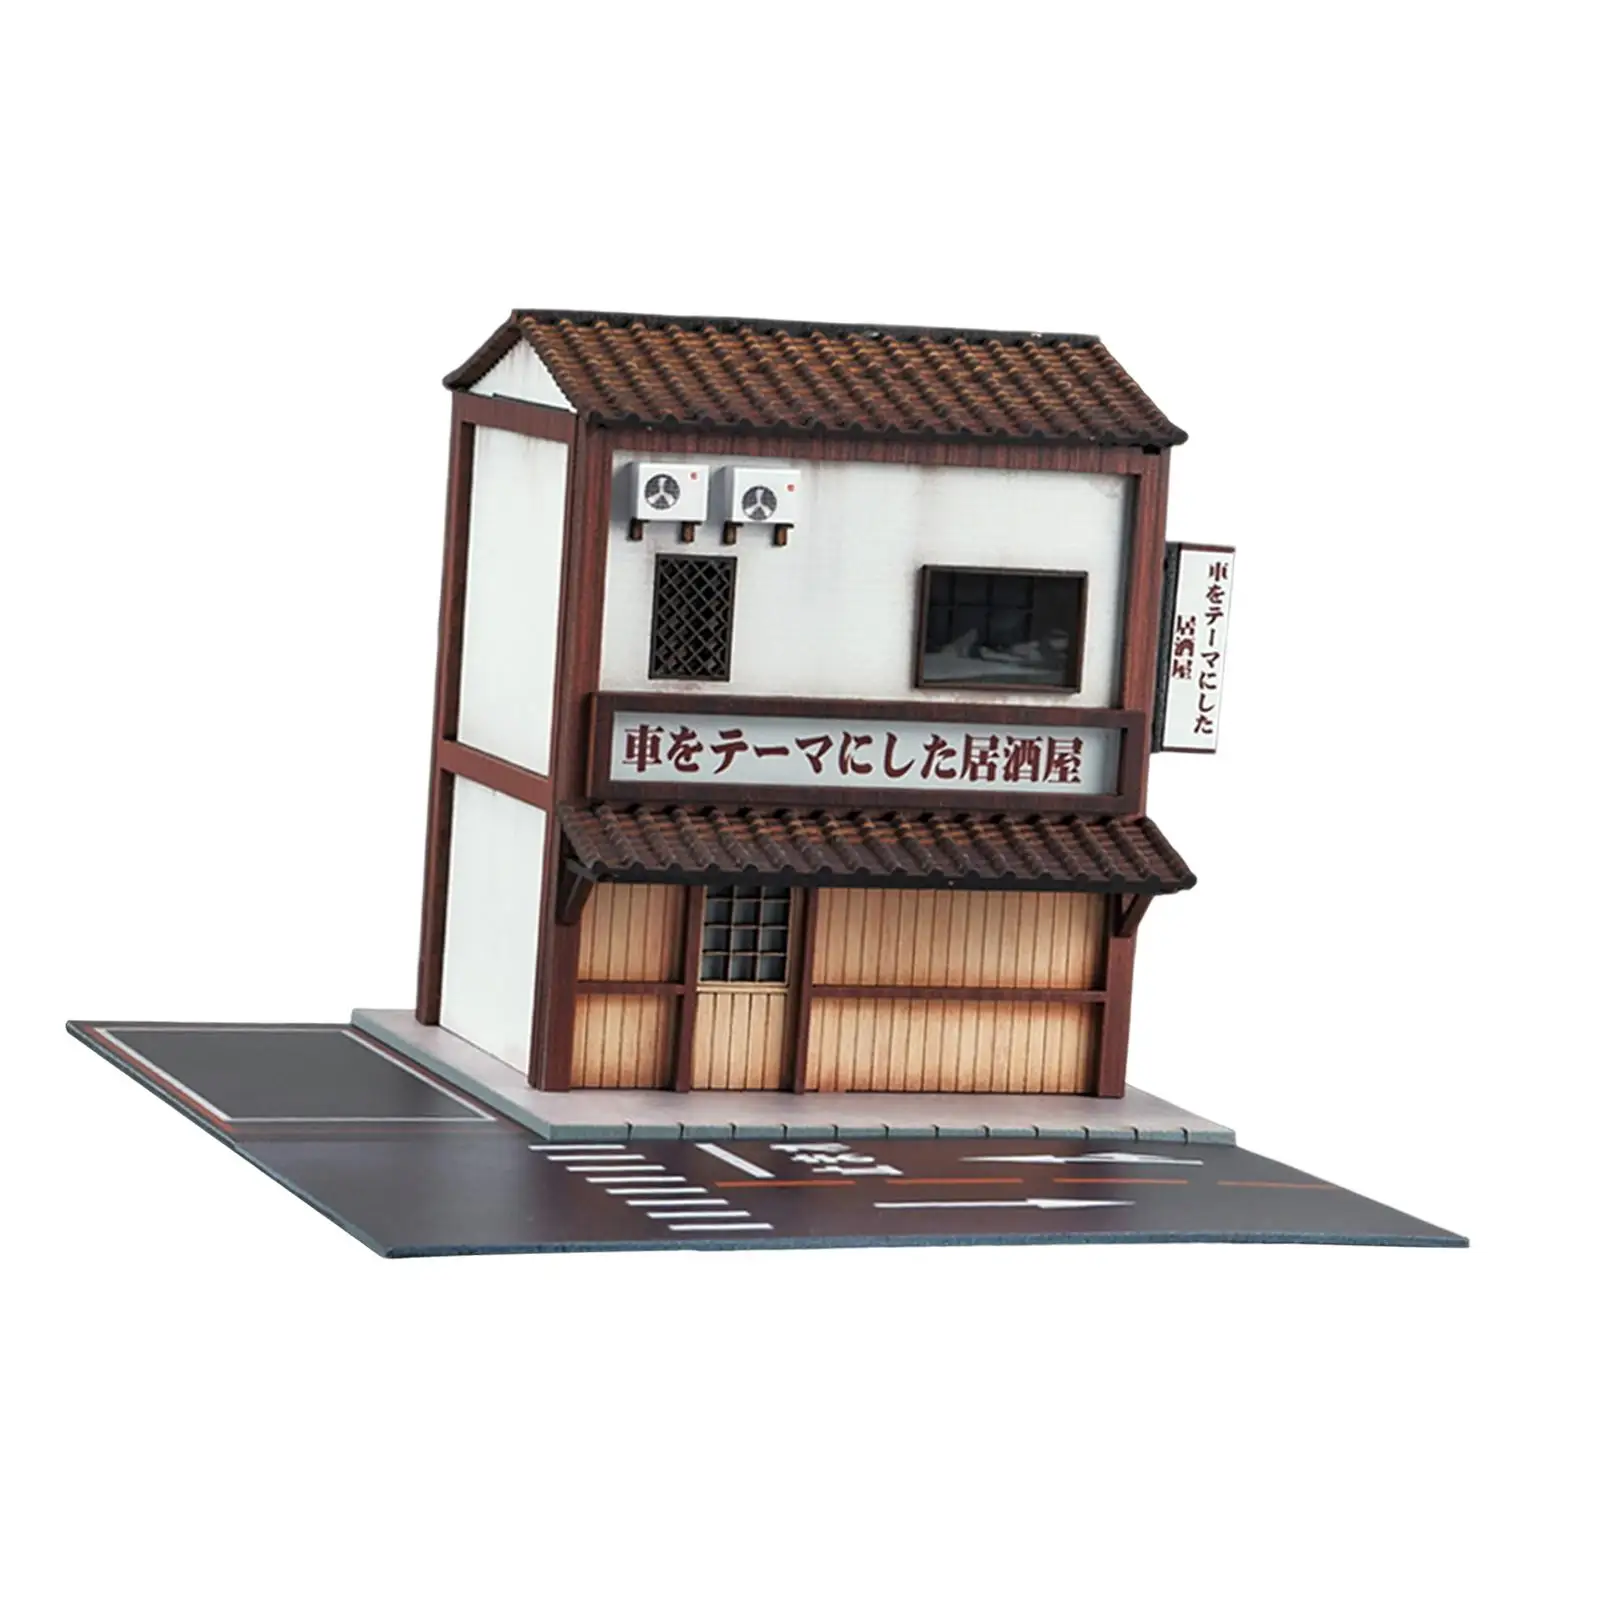 1:64 Parking Lots Model with Lighting Layout Models Miniatures Garage for Micro Landscape Scenery City DIY Model Diorama Office